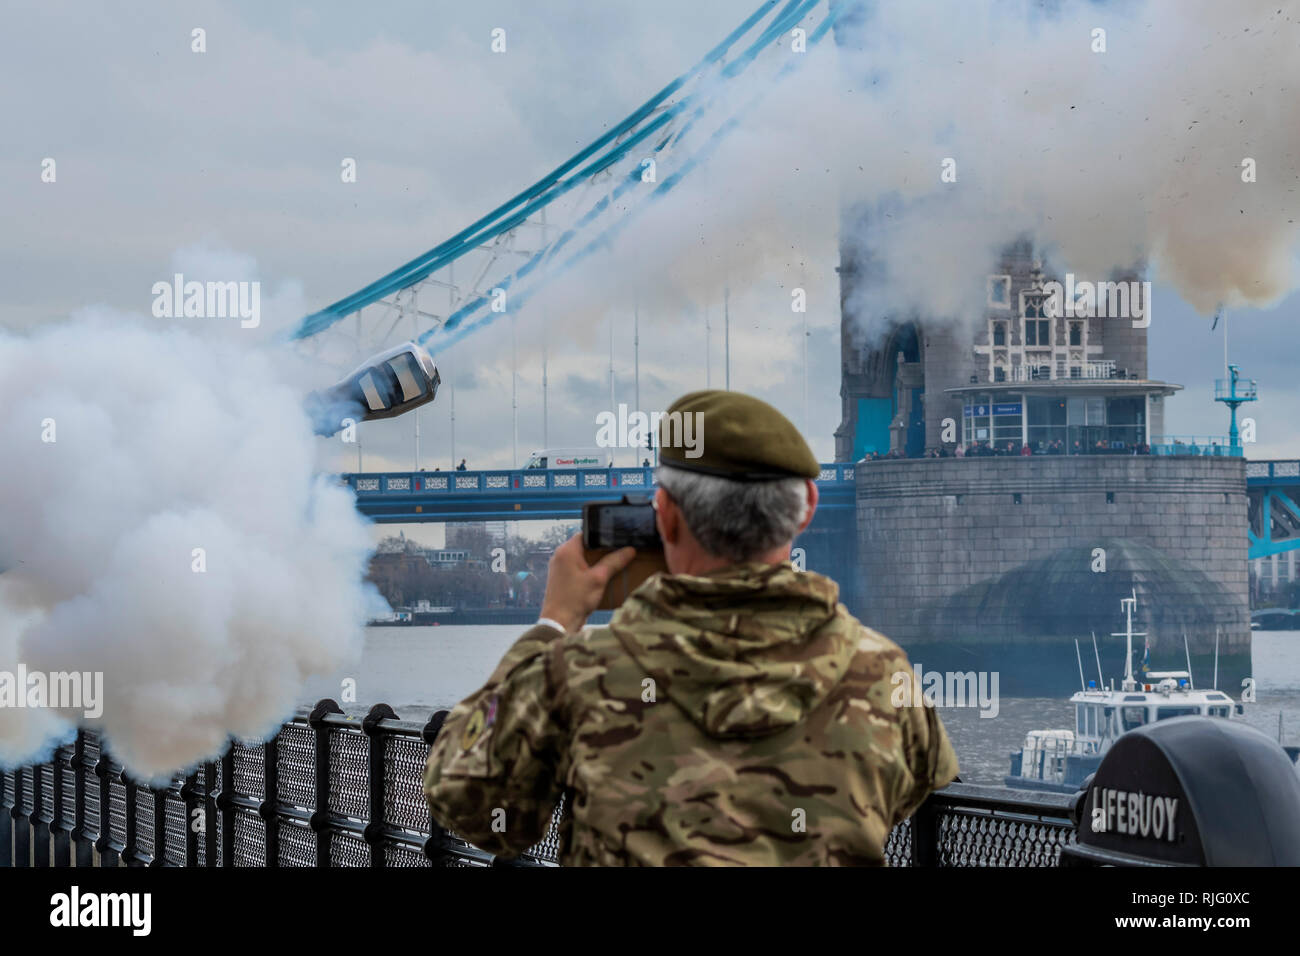 London, UK. 6th Feb 2019. The Honourable Artillery Company (HAC), the City of London's Reserve Army Regiment, fire a 62 Gun Royal Salute at the Tower of London in honour of the mark the 67th anniversary of Her Majesty The Queen's Accession to the Throne . The three L118 Ceremonial Light Guns fired at ten second intervals.   London to show their Credit: Guy Bell/Alamy Live News Stock Photo